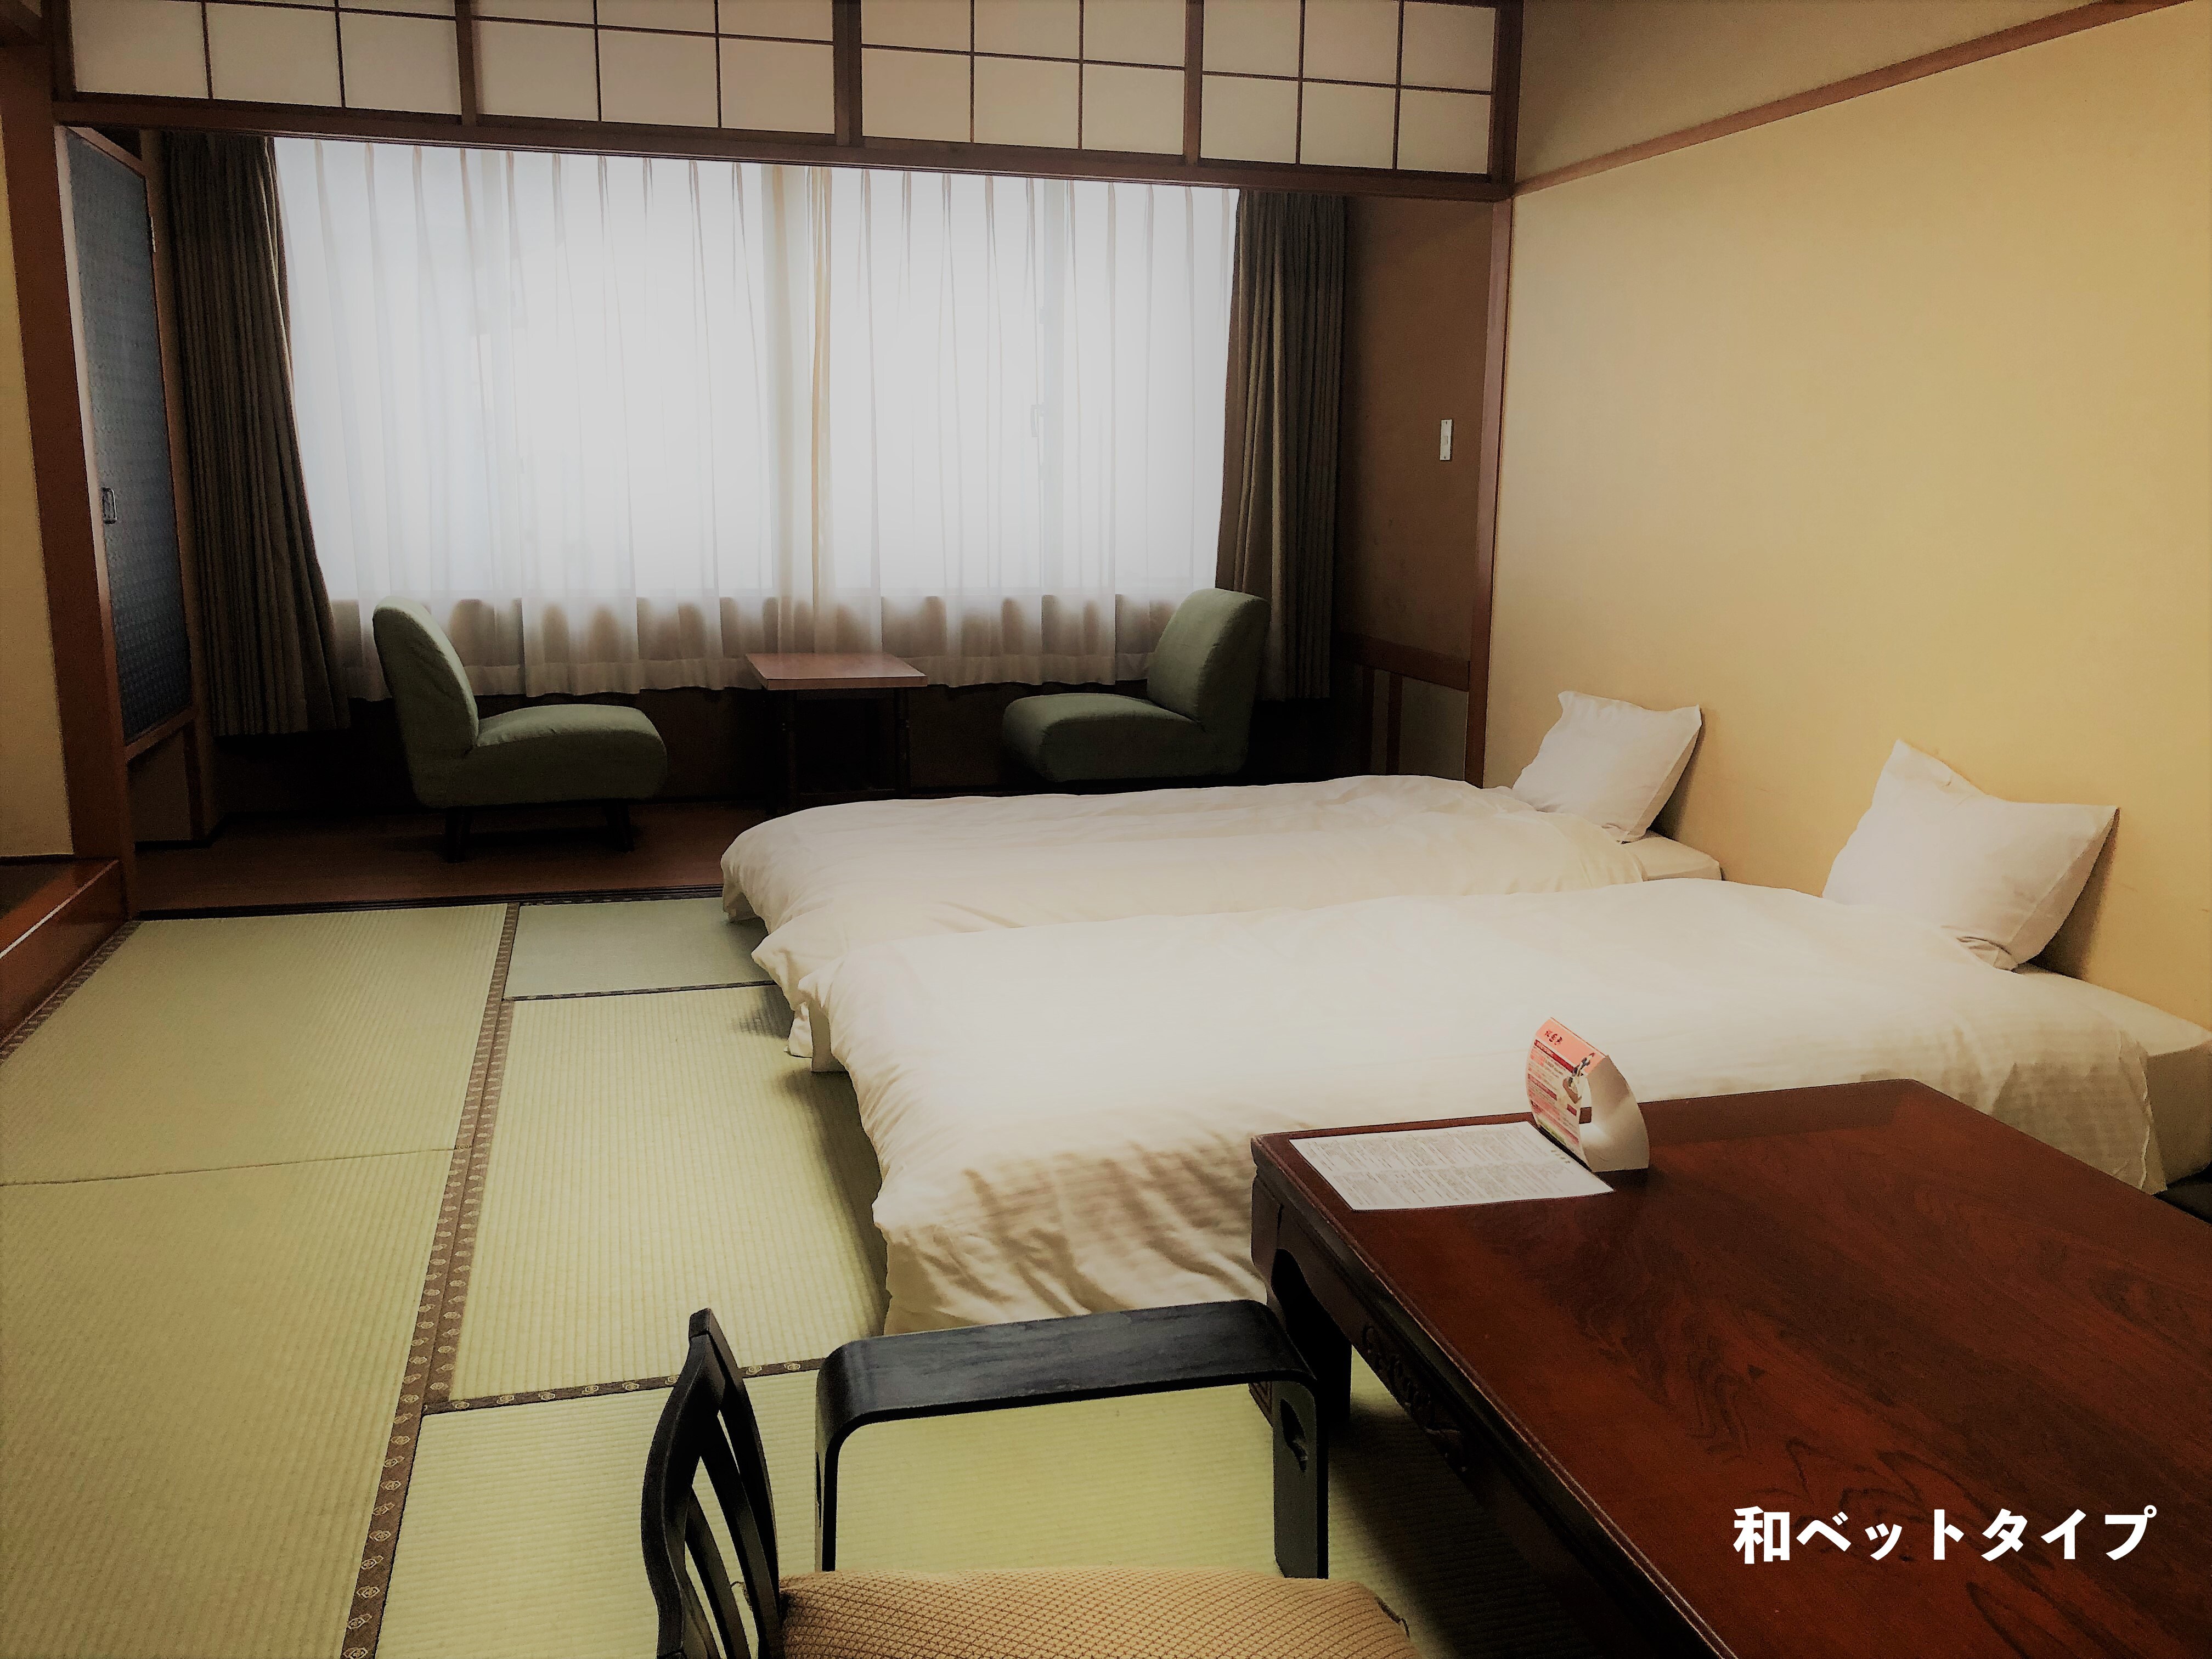 Japanese-style room 10 tatami mats / Japanese-style bed type